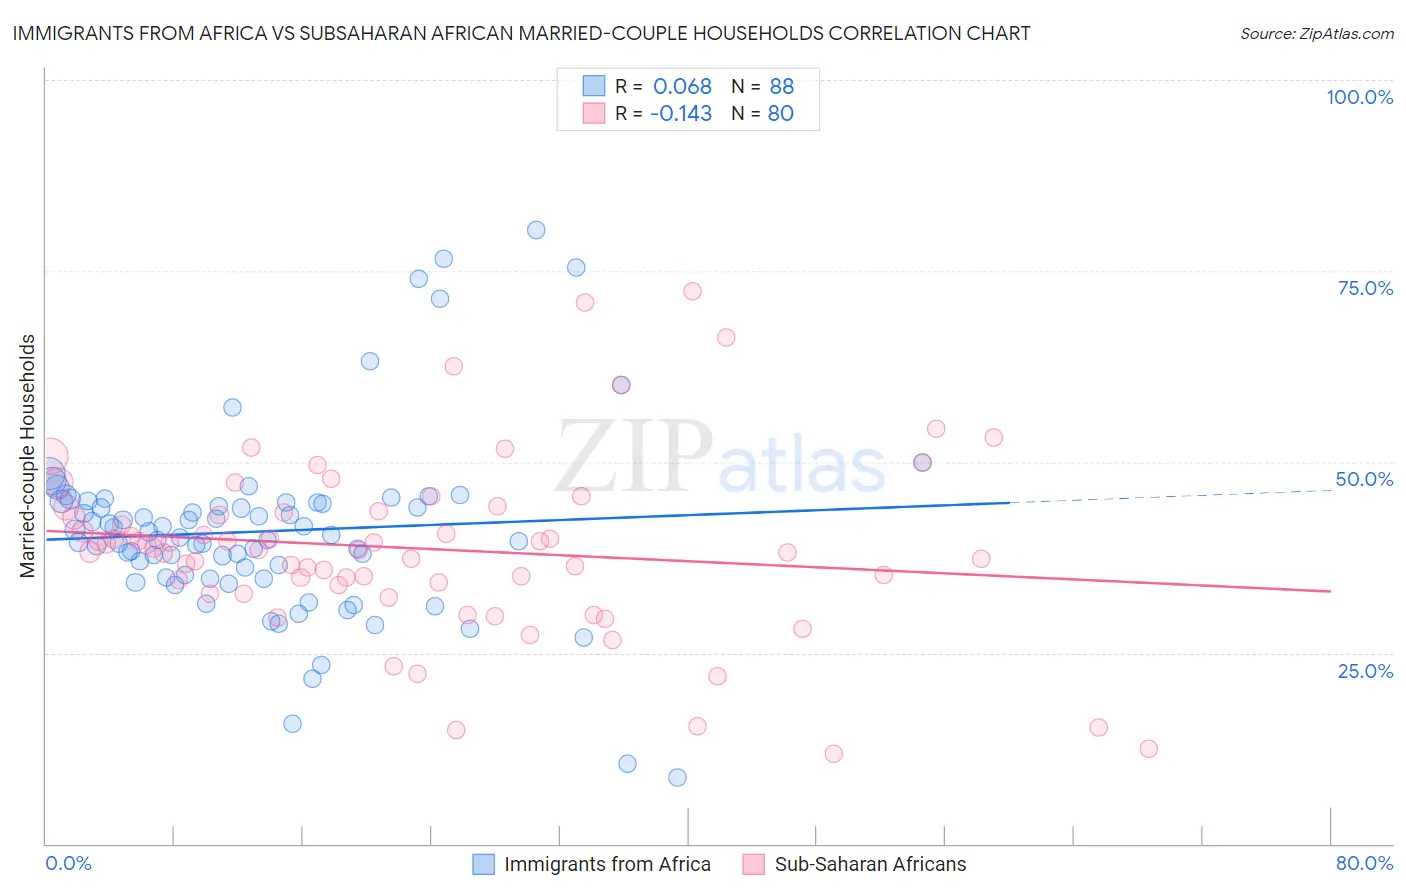 Immigrants from Africa vs Subsaharan African Married-couple Households